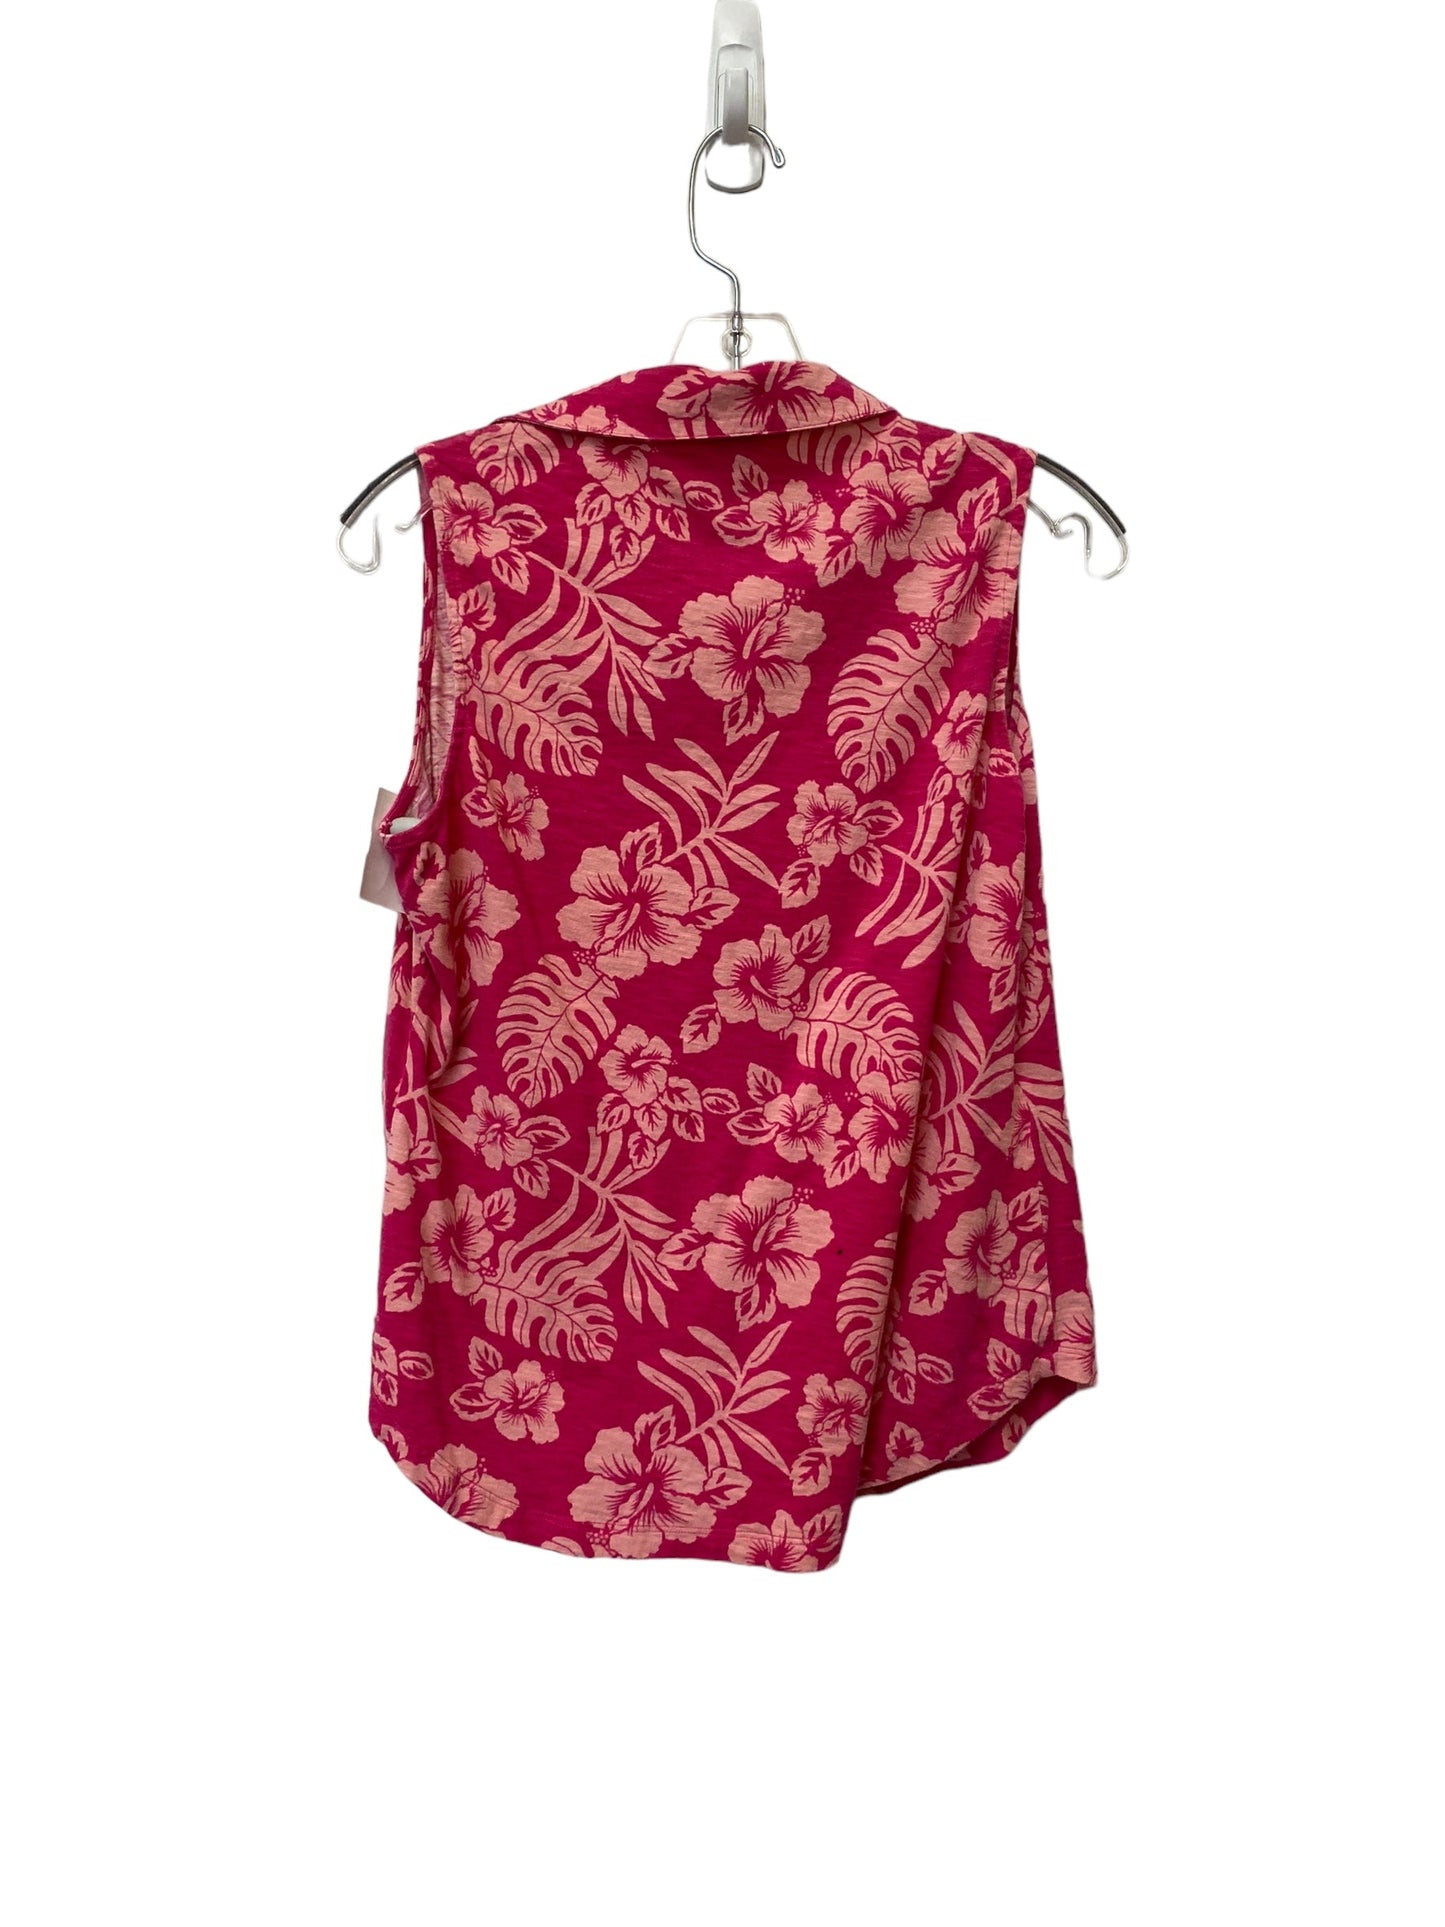 Pink Top Sleeveless Tommy Bahama, Size M